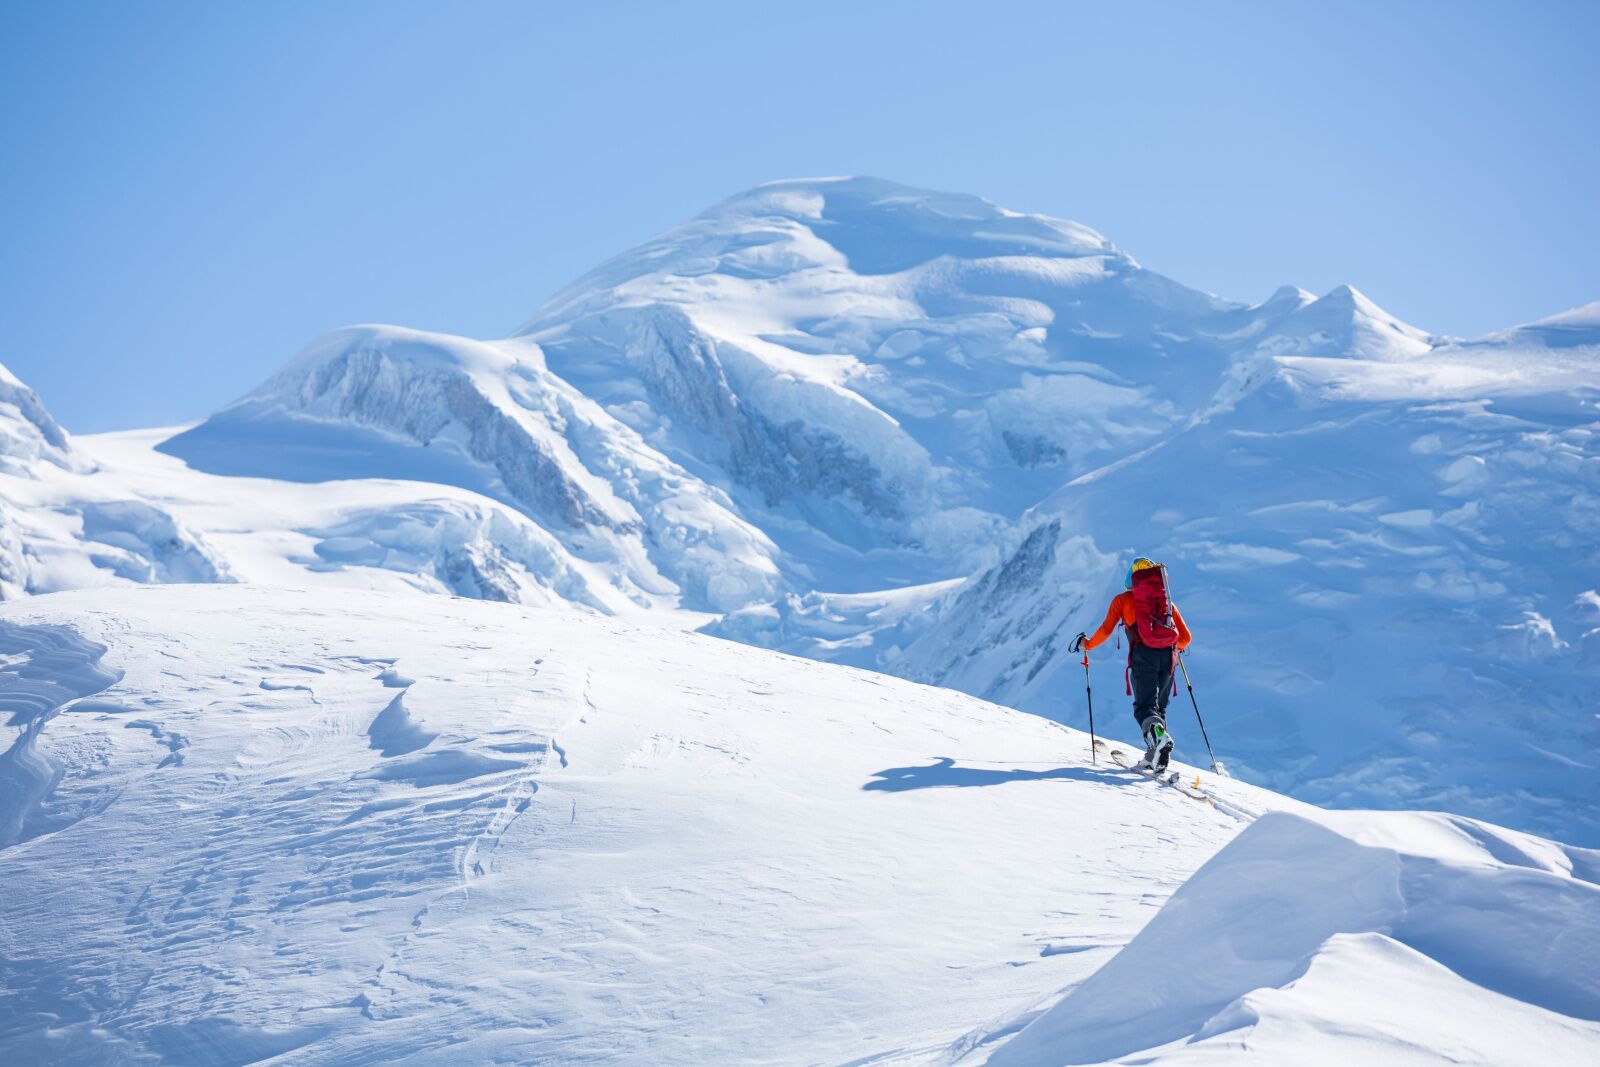 Chamonis is one of the best alps ski resorts for ski touring, as seen here as an advanced skier traverses a ridgeline